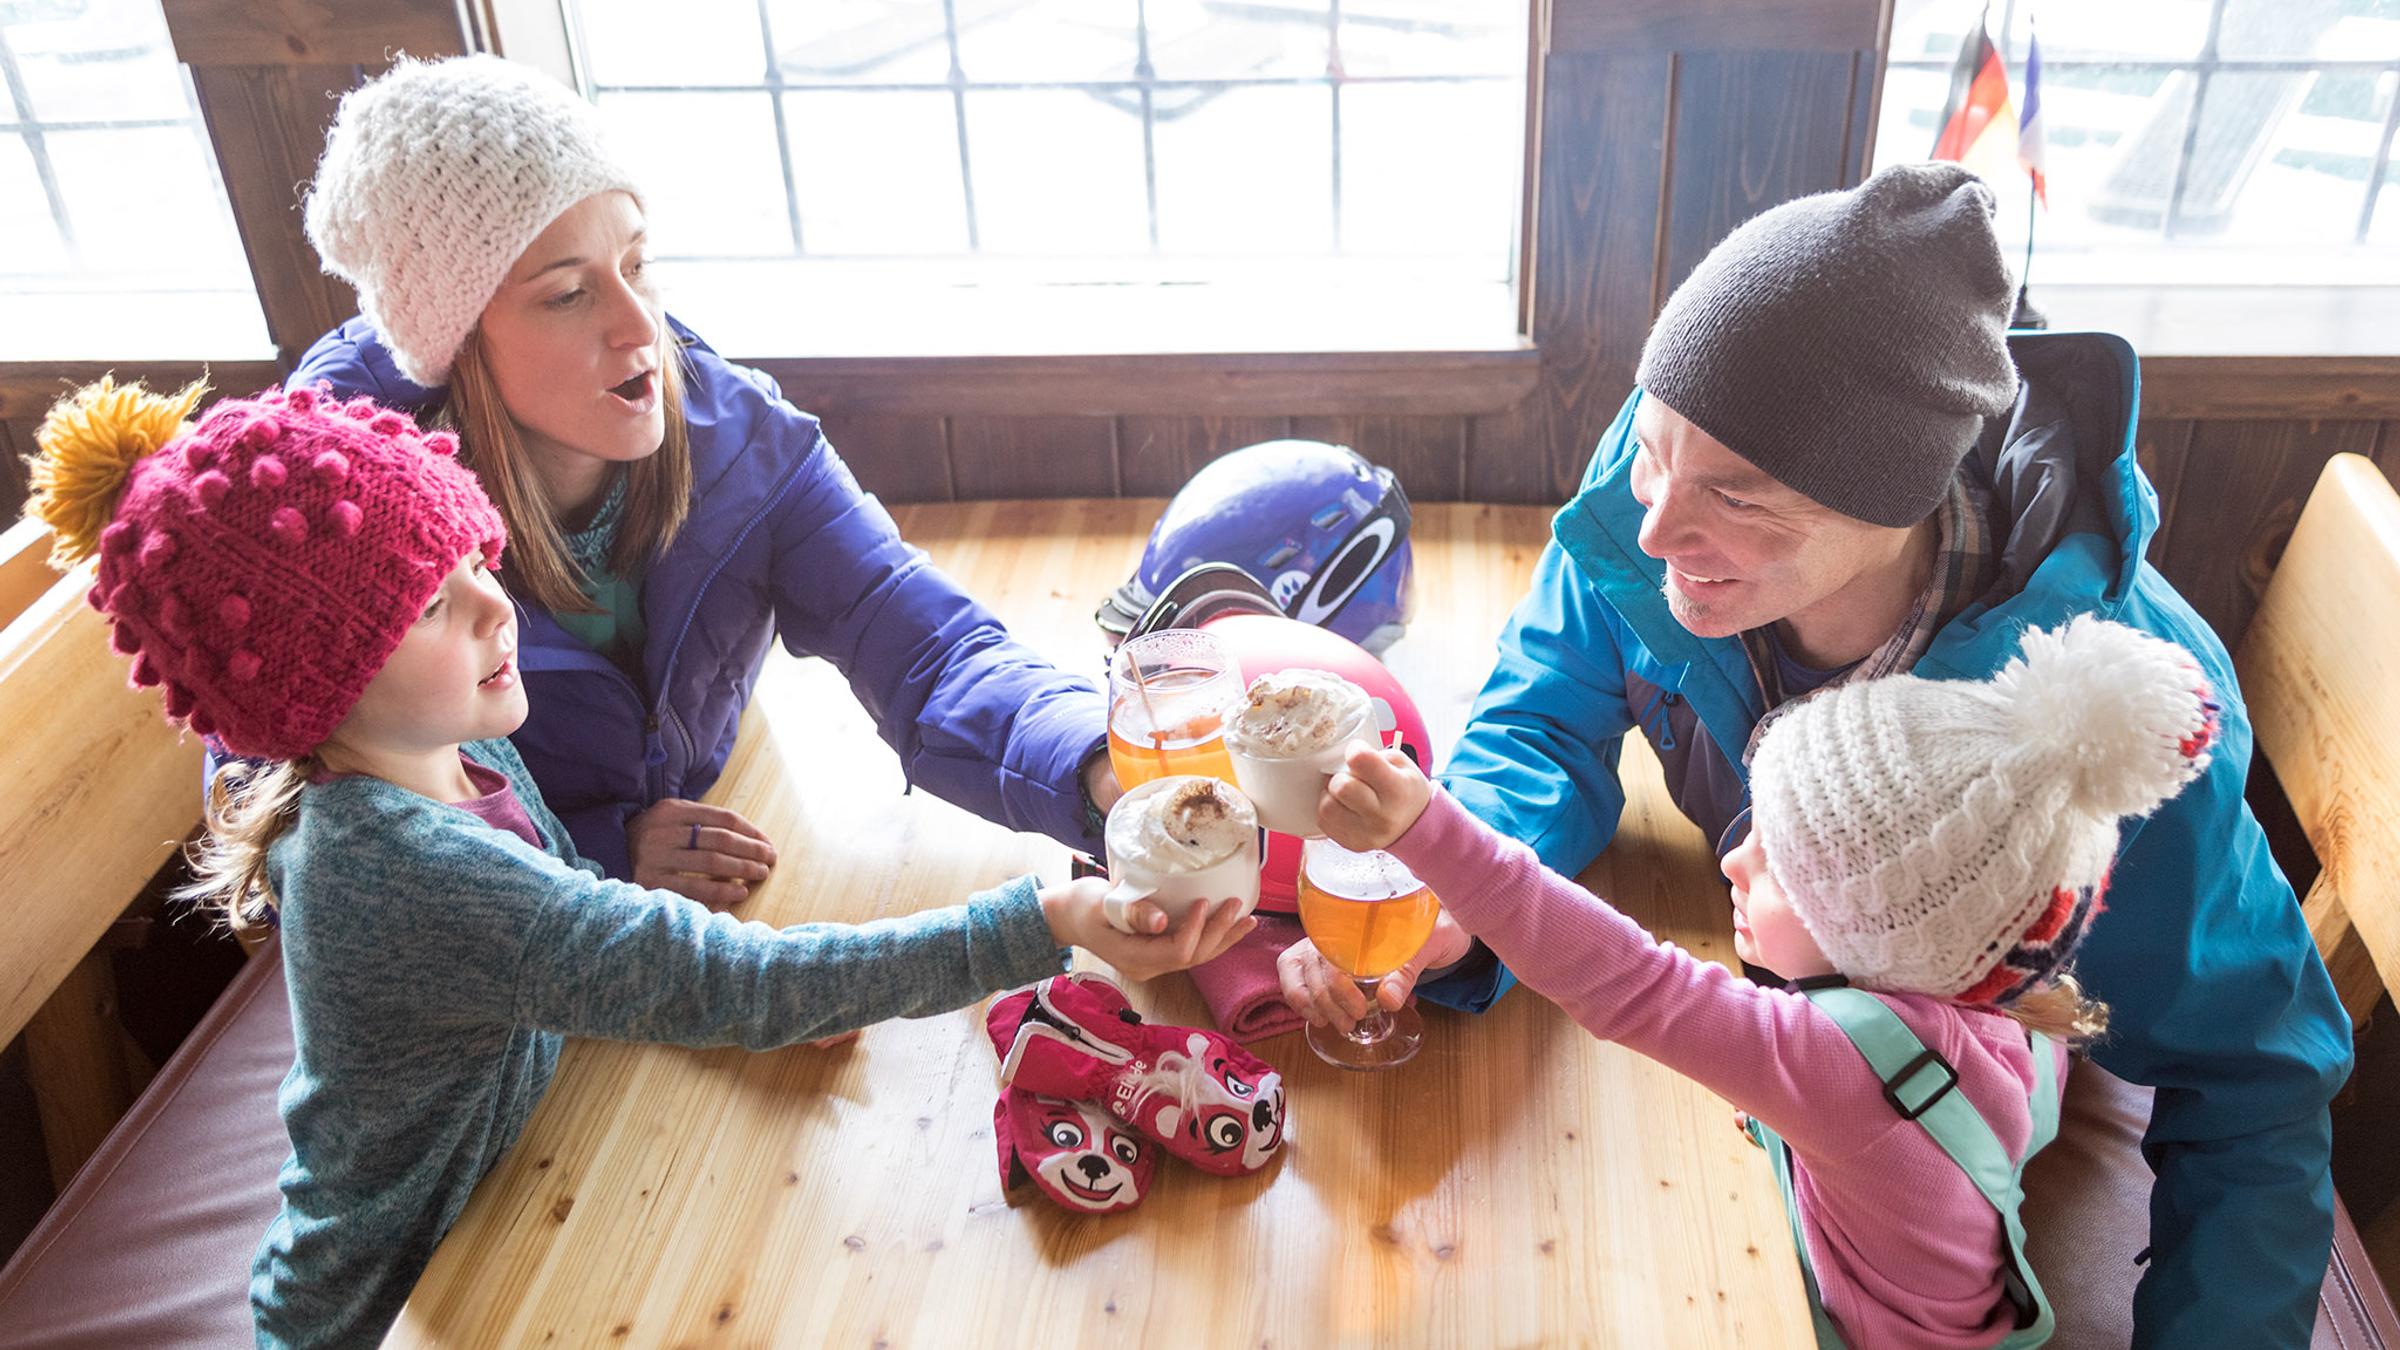 Zerrenner family aprés at the chalet at alpine meadows